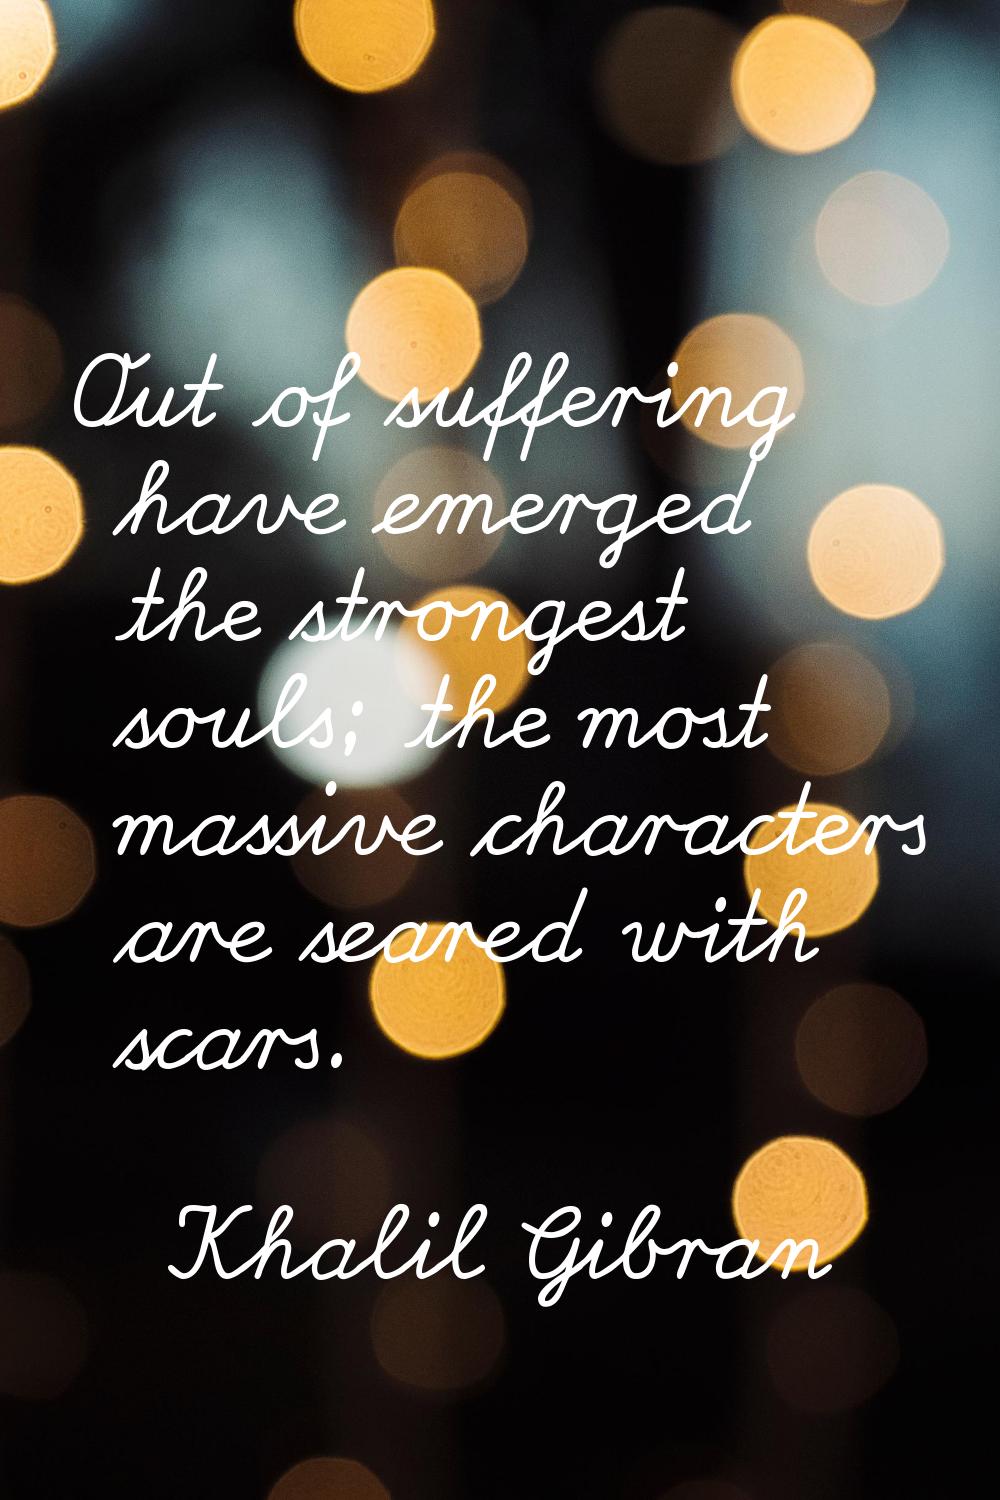 Out of suffering have emerged the strongest souls; the most massive characters are seared with scar